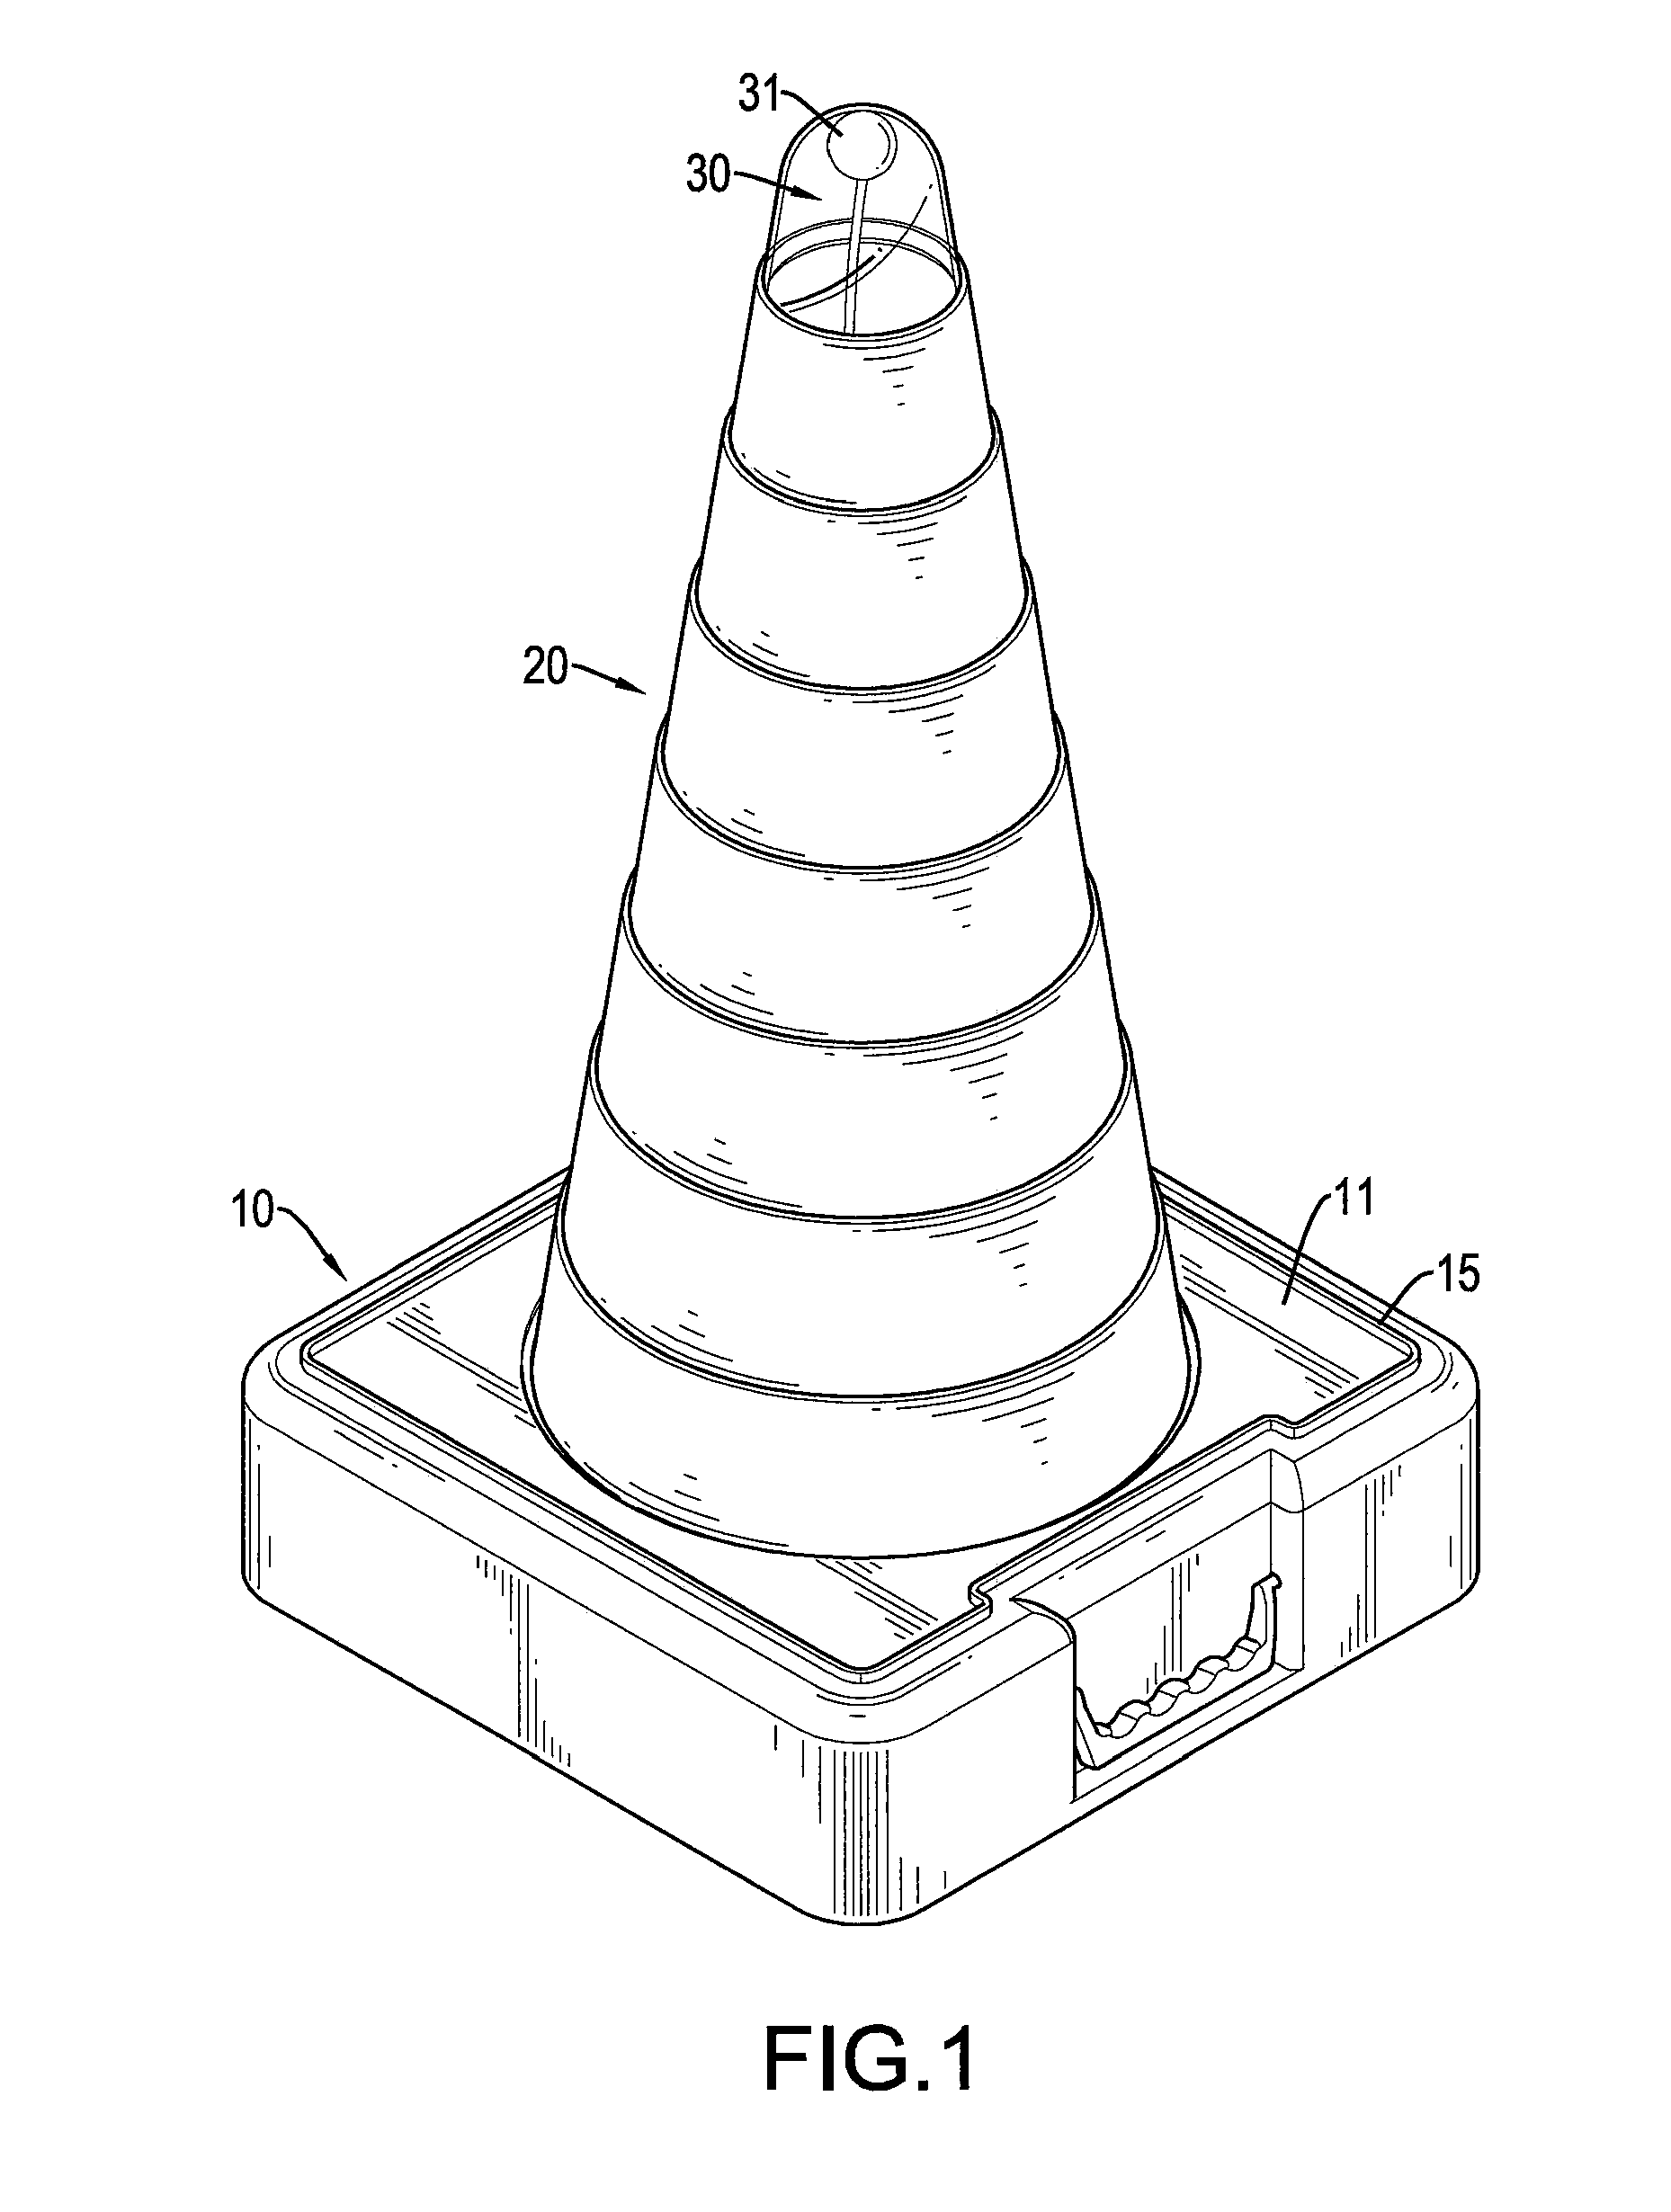 Traffic cone assembly